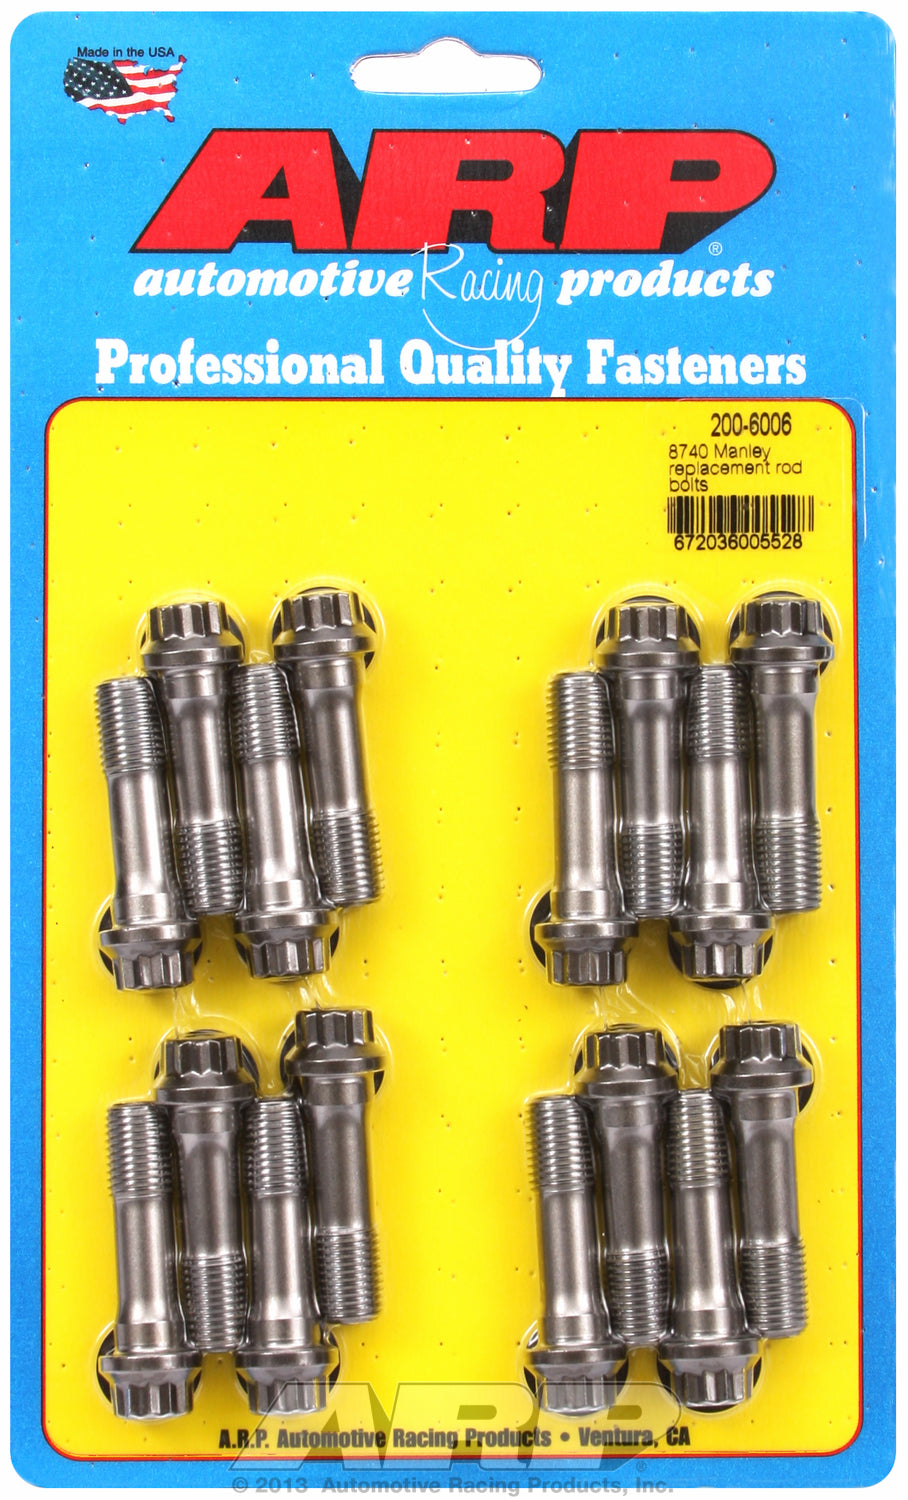 8740 General Replacement Rod Bolt Kit Complete Manley Replacement